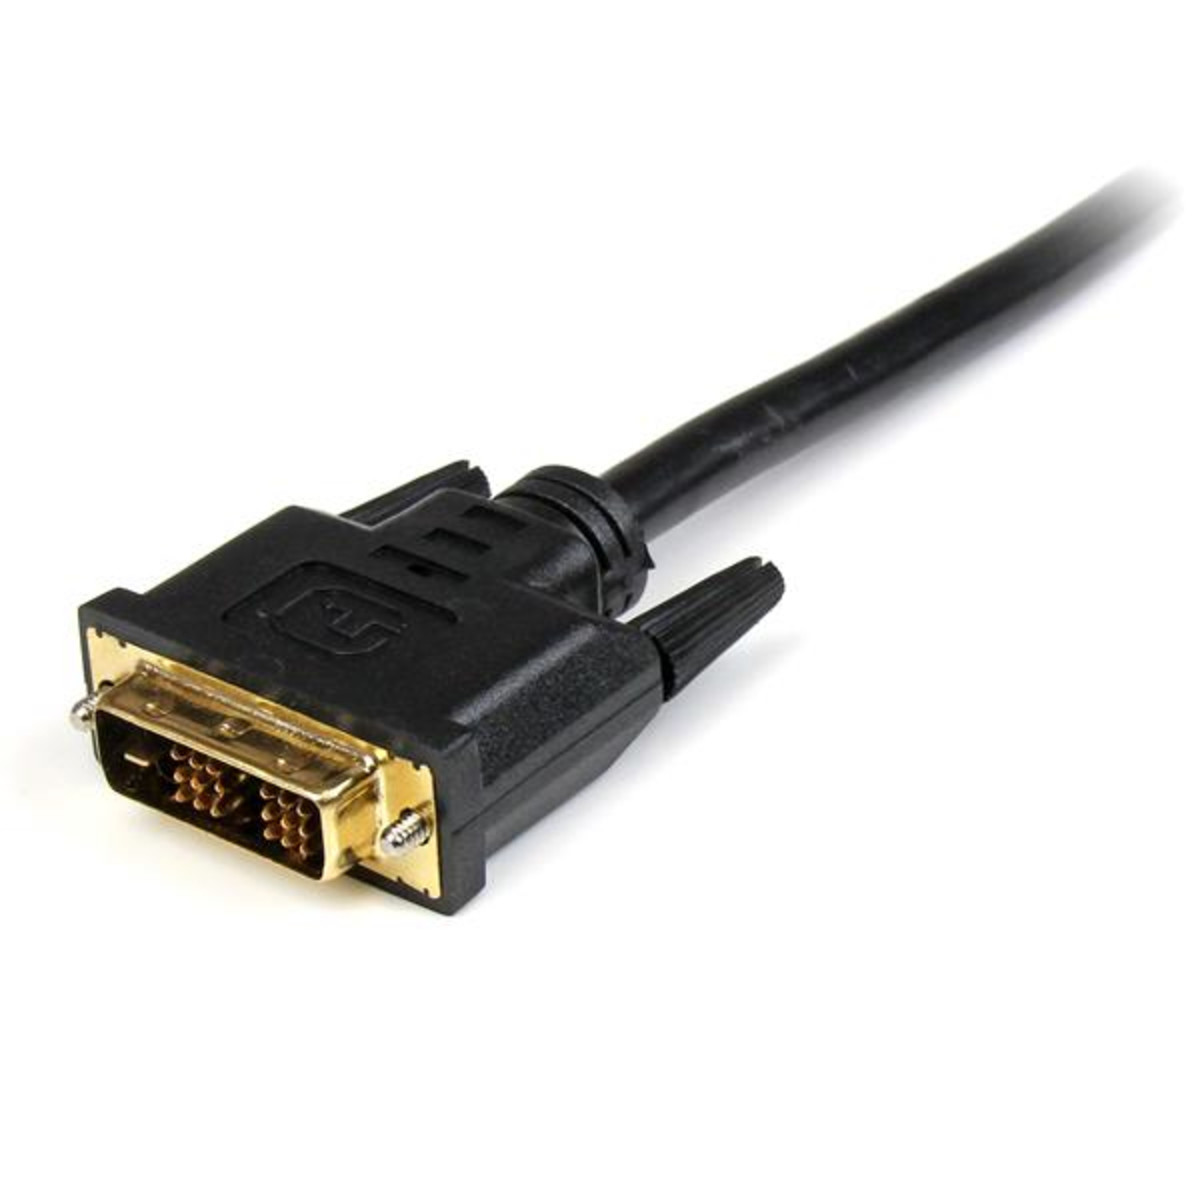 0.5m HDMI to DVI-D Cable - M/M